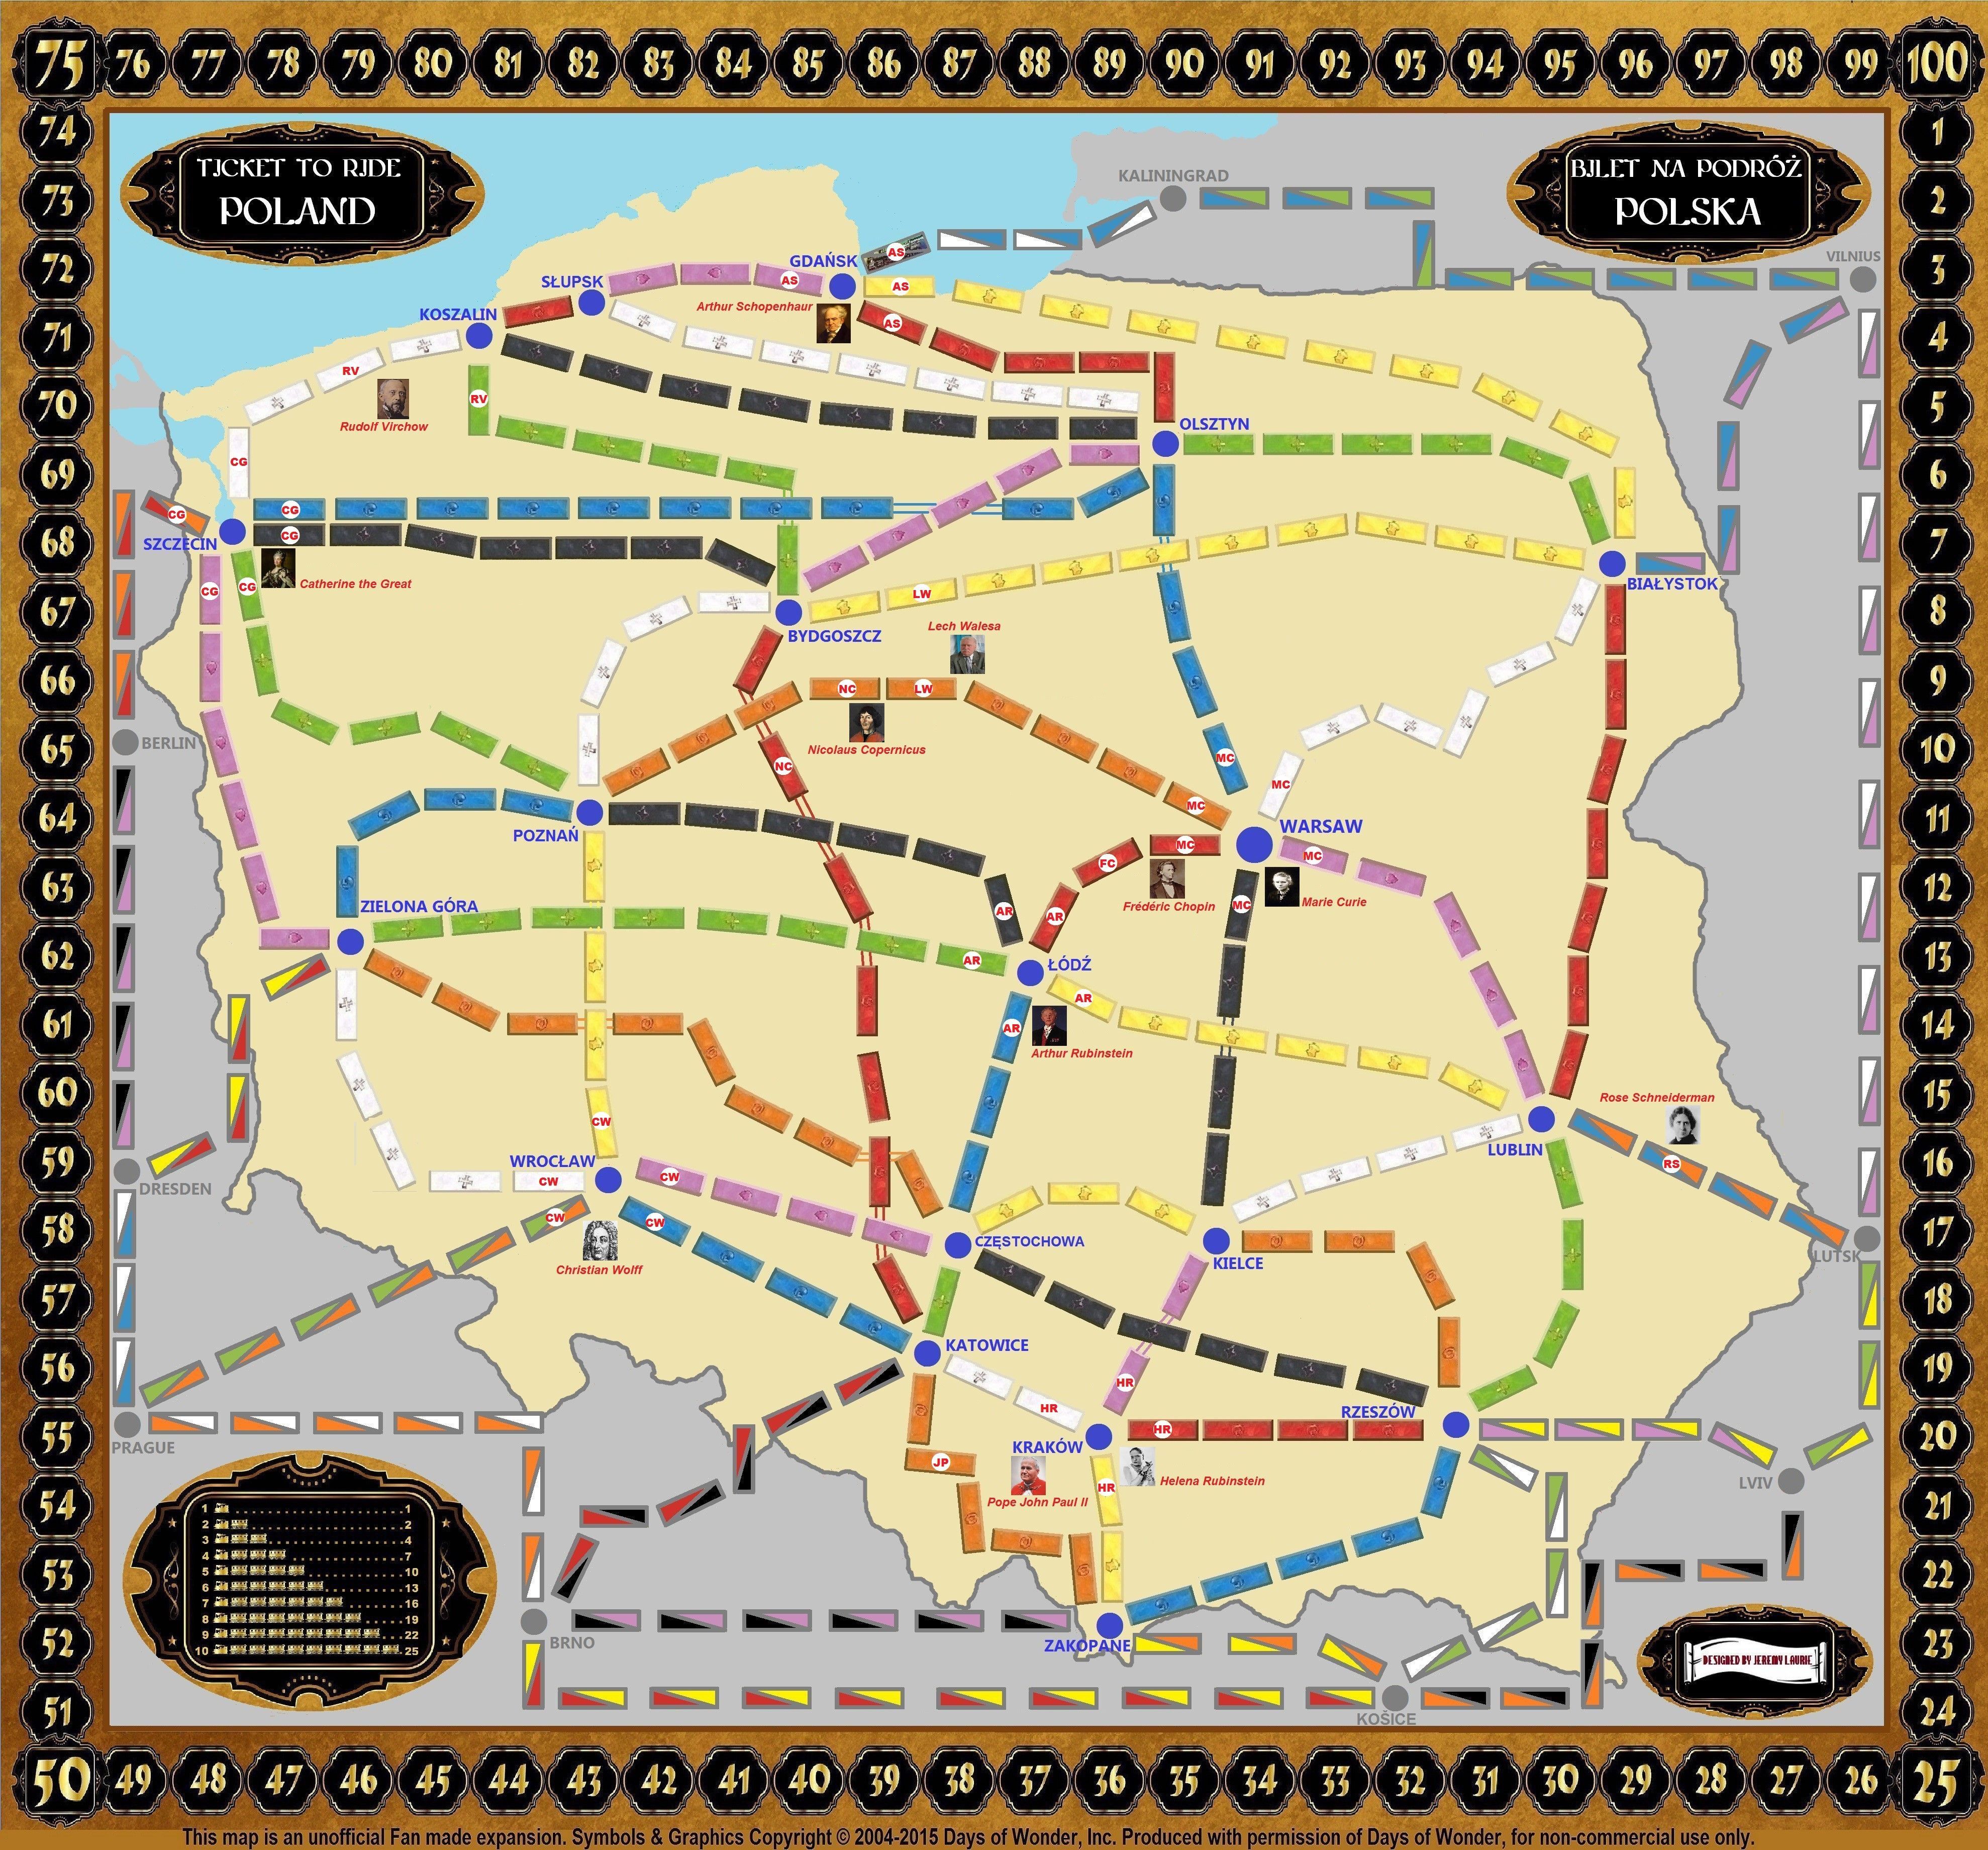 Poland (fan expansion for Ticket to Ride)